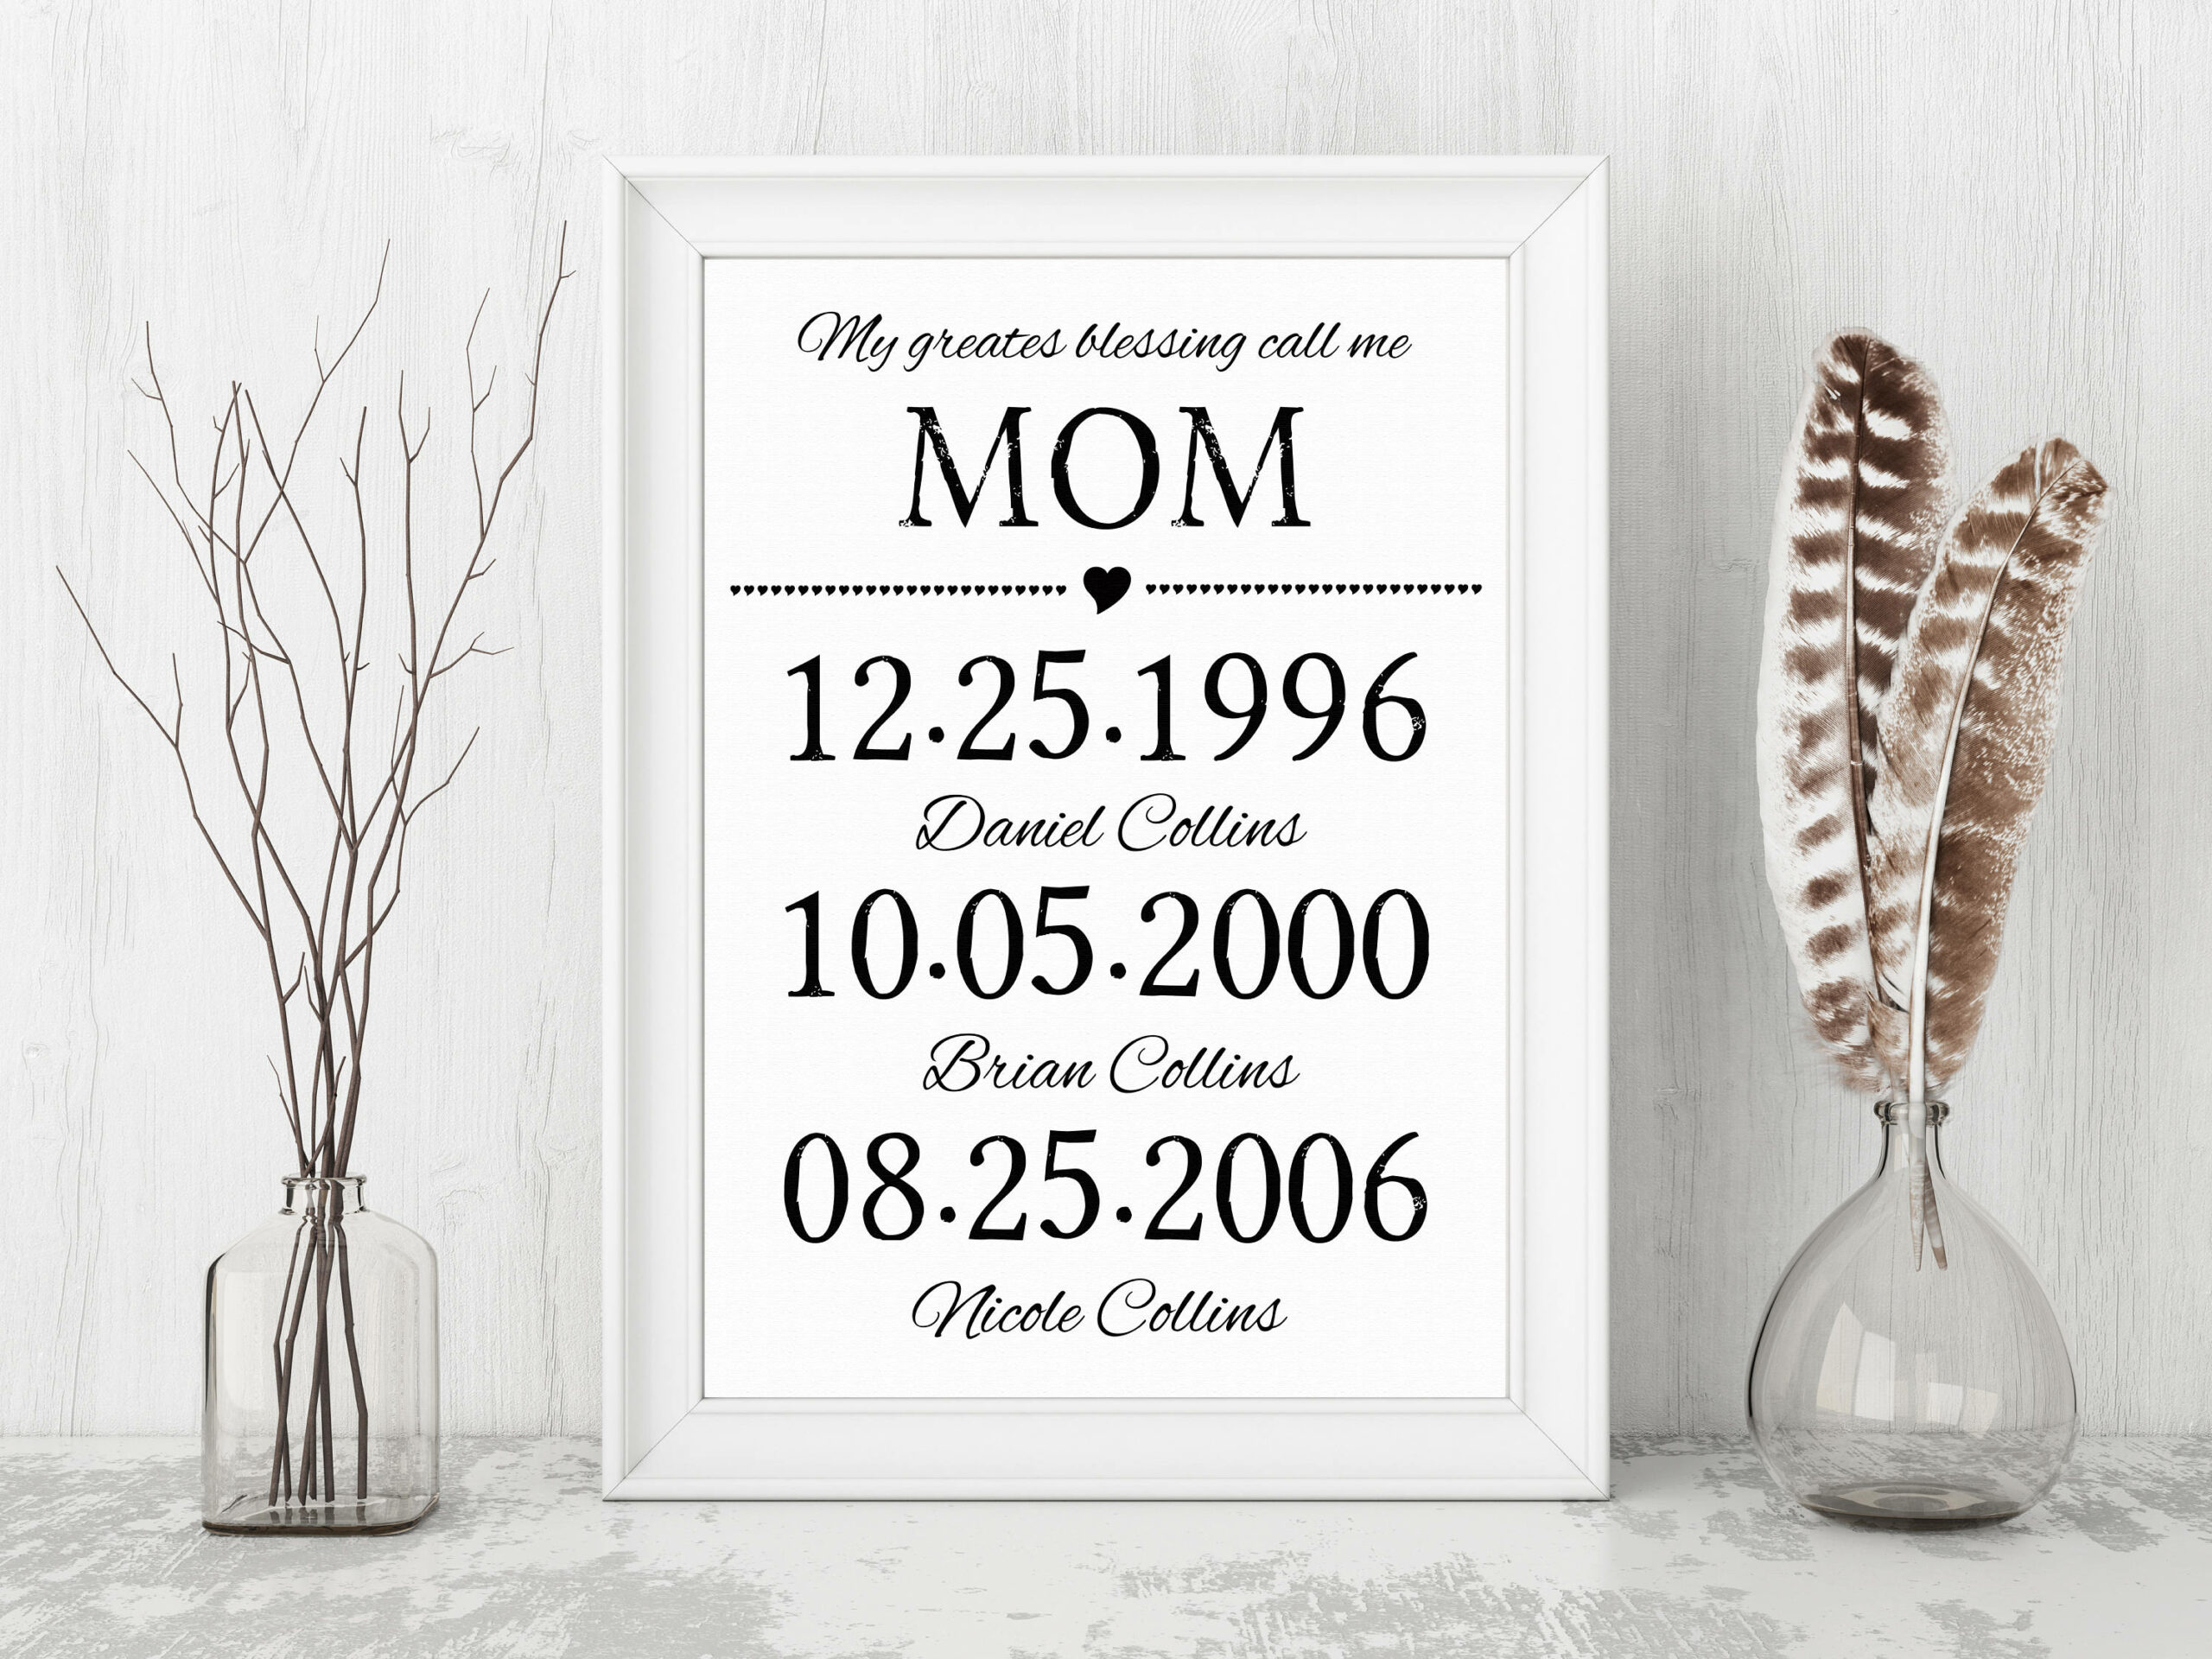 Best Personalized Gift Ideas In 2023 For Any Occasion | Blog | allBambu